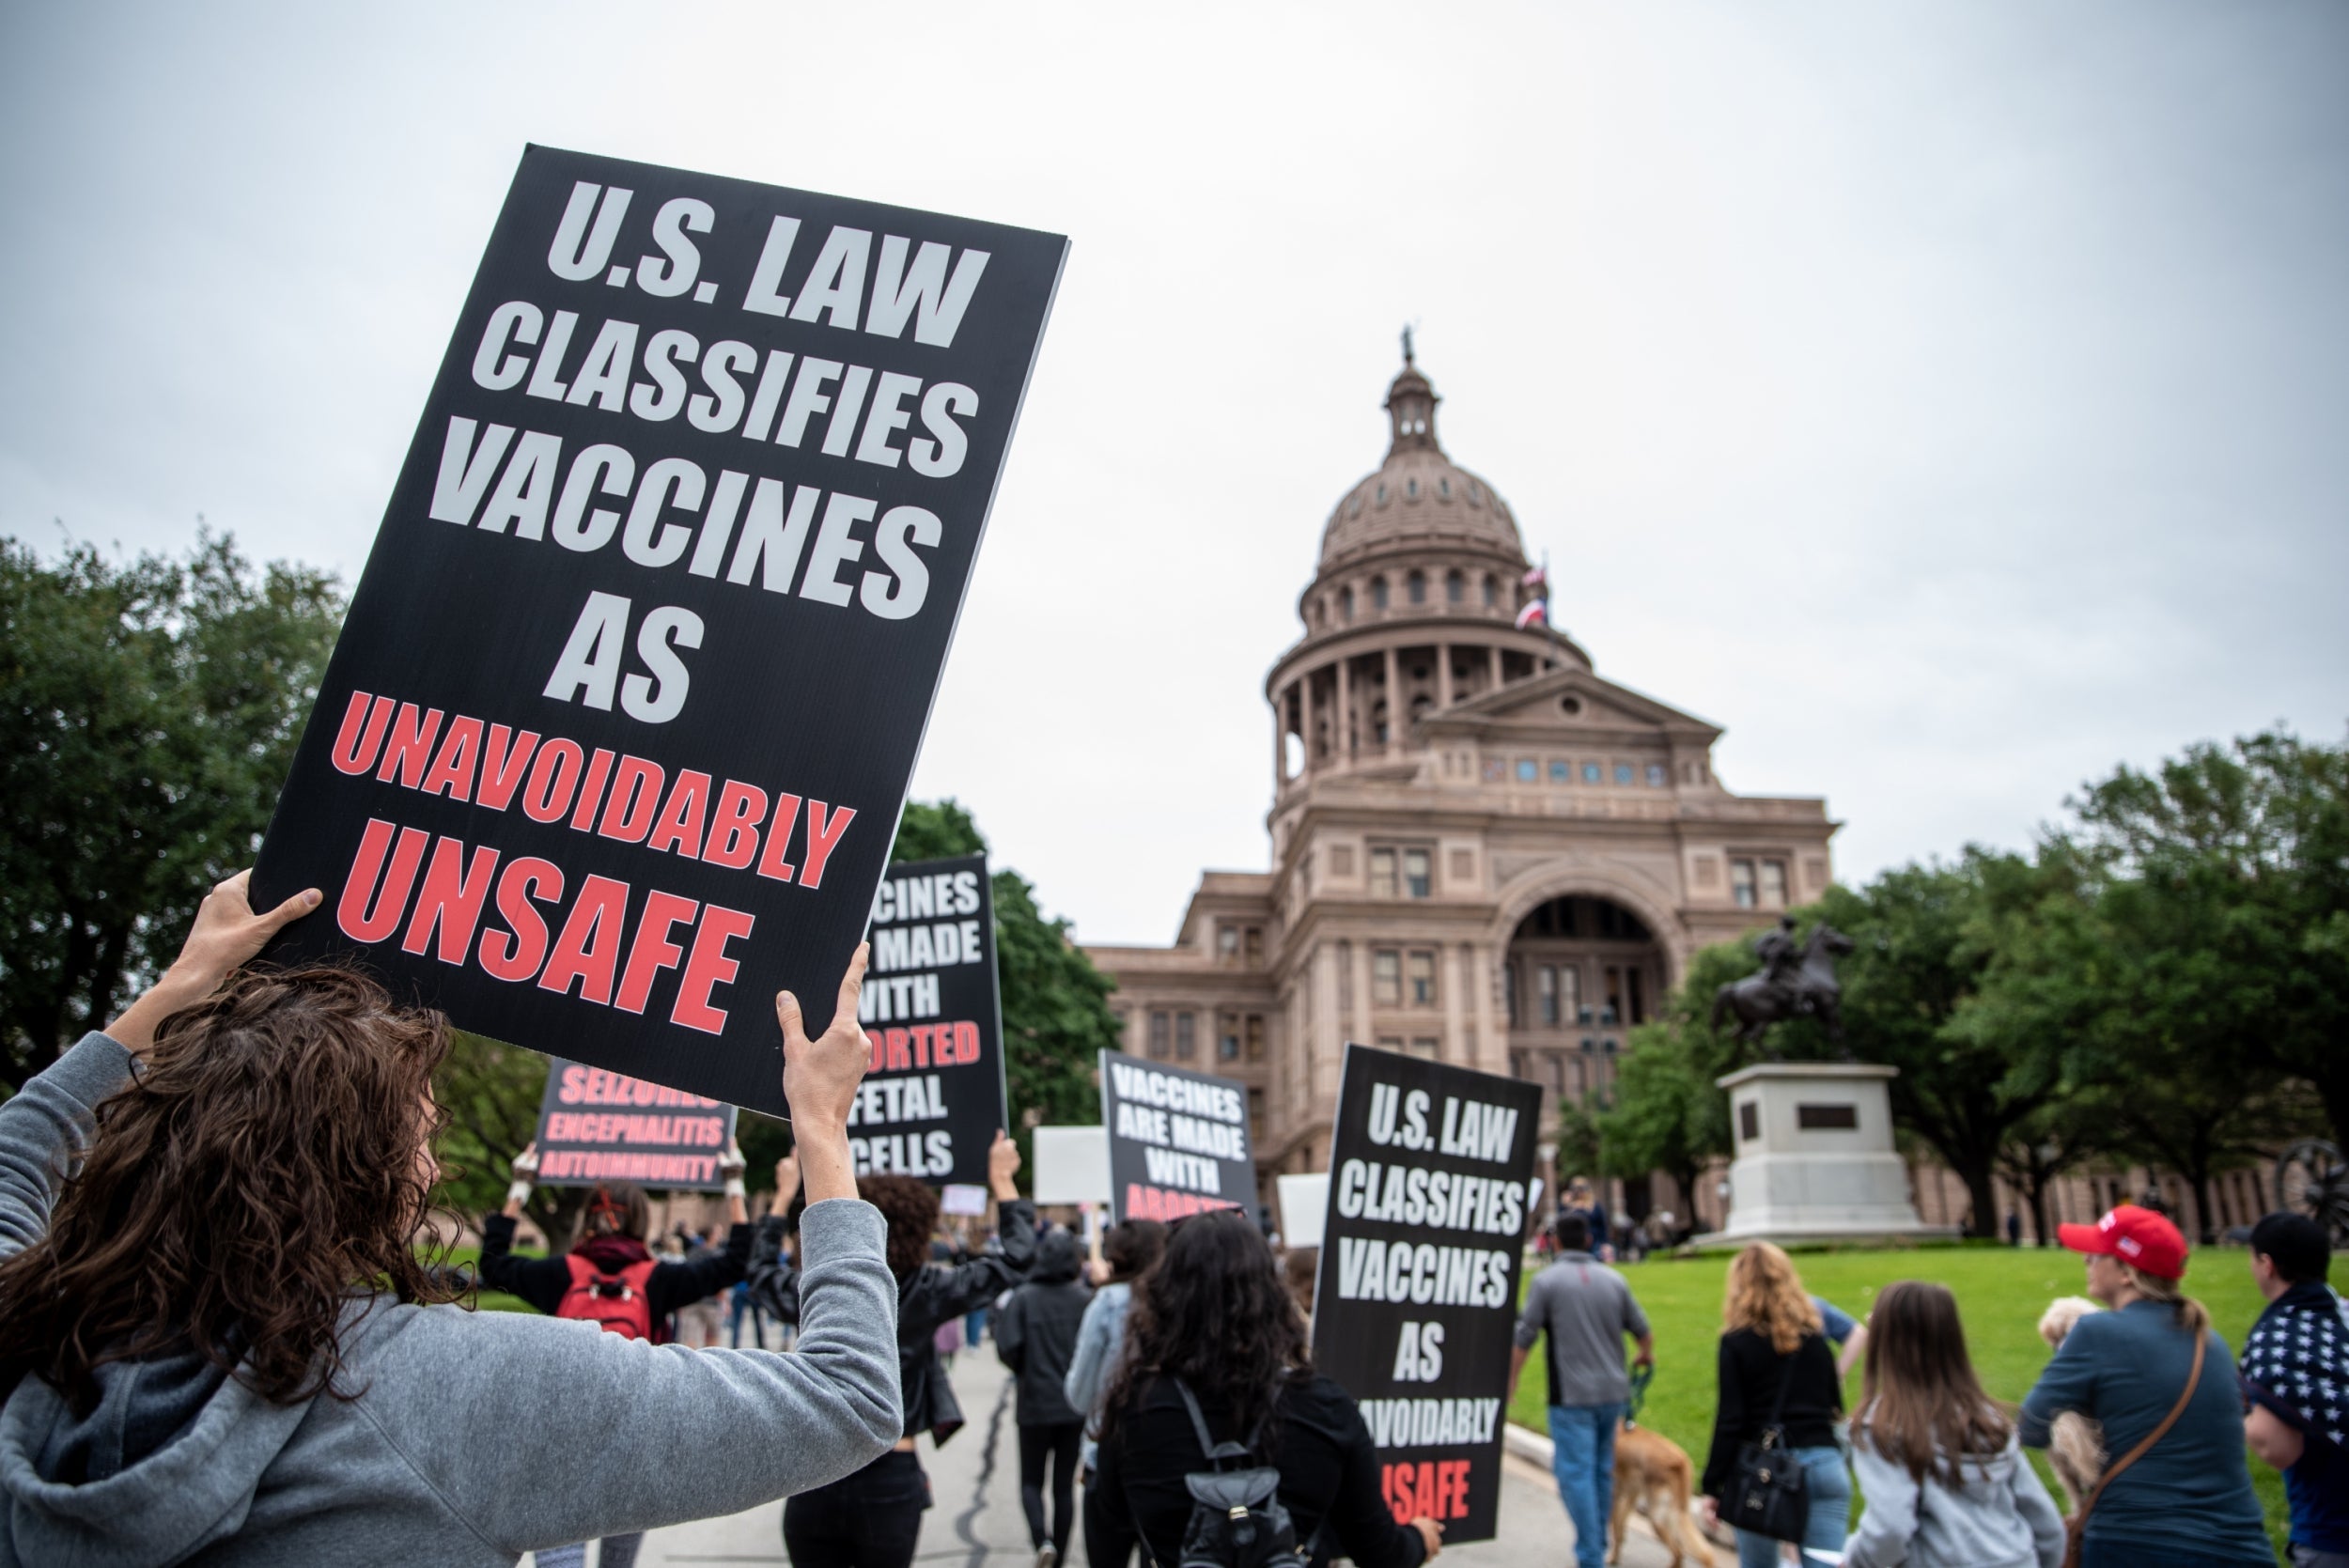 Protesters walk towards the Texas State Capital building on April 18, 2020 in Austin, Texas. The protest was organized by Infowars host Owen Shroyer who is joining other protesters across the country in taking to the streets to call for the country to be opened up despite the risk of Covid-19.